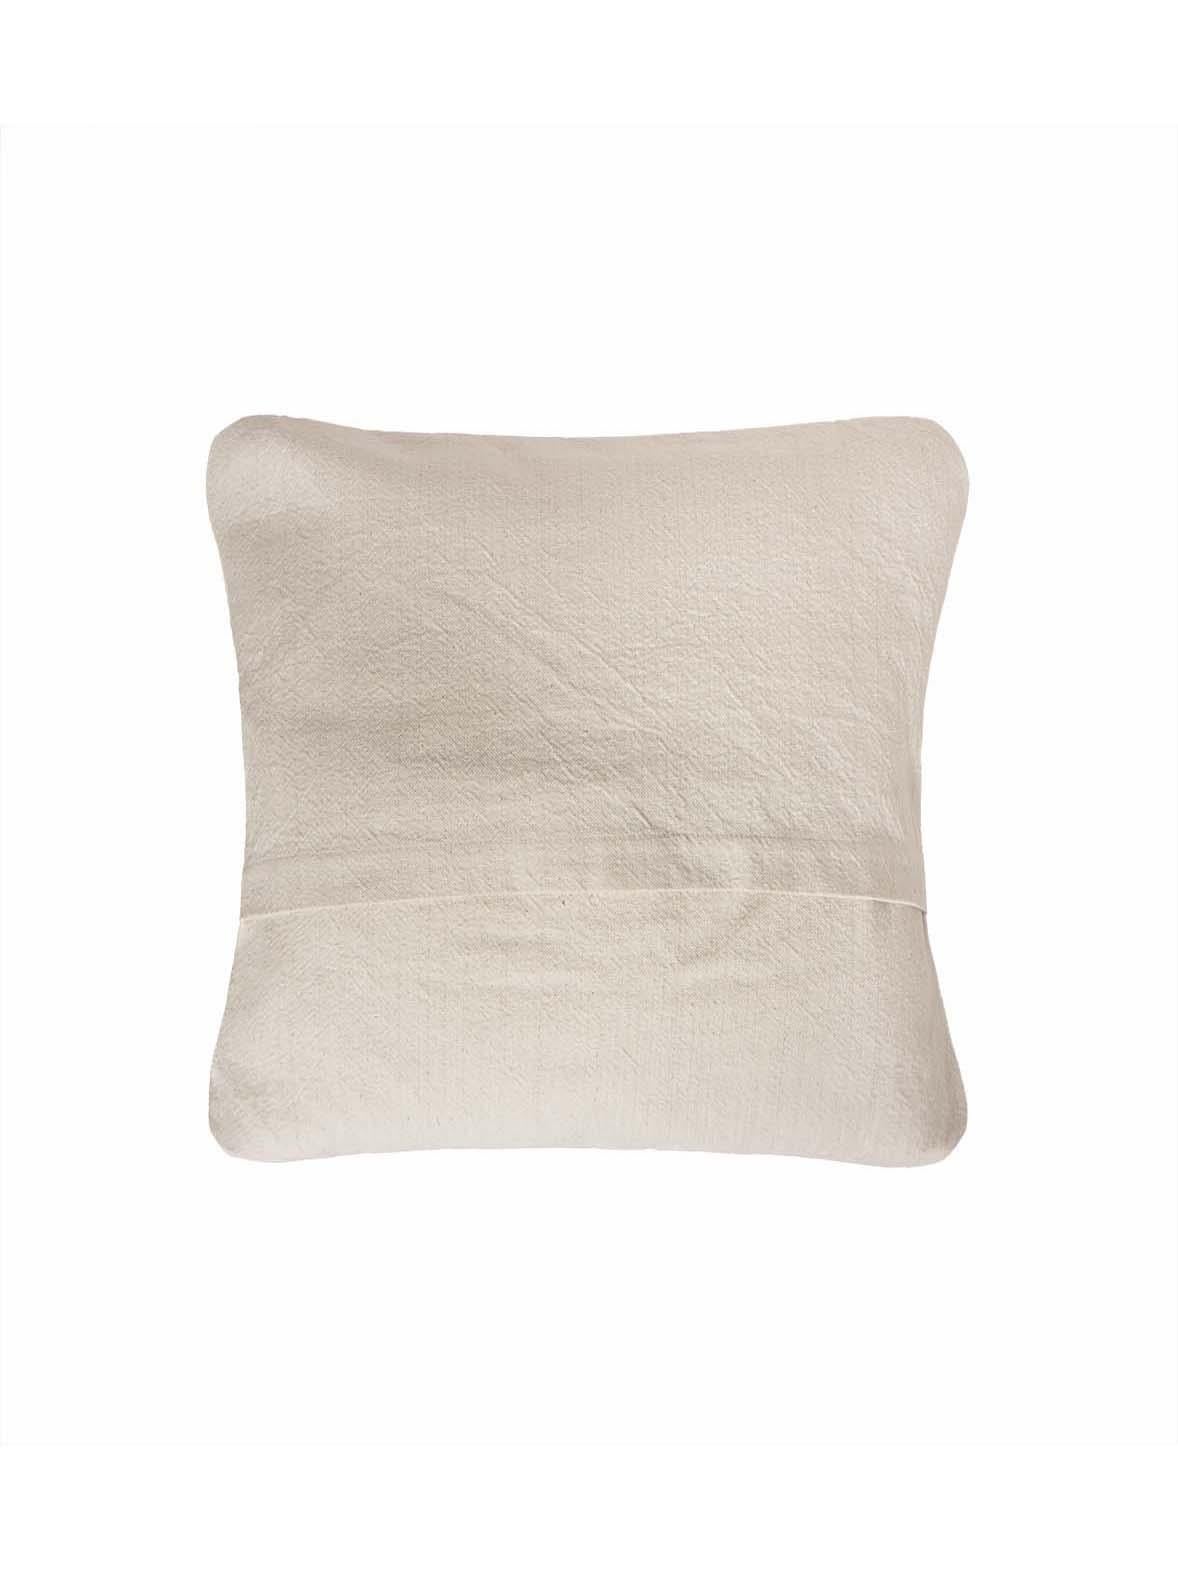 Hand-Woven White Cushion Cover, made of Handspun and Handwoven wool For Sale